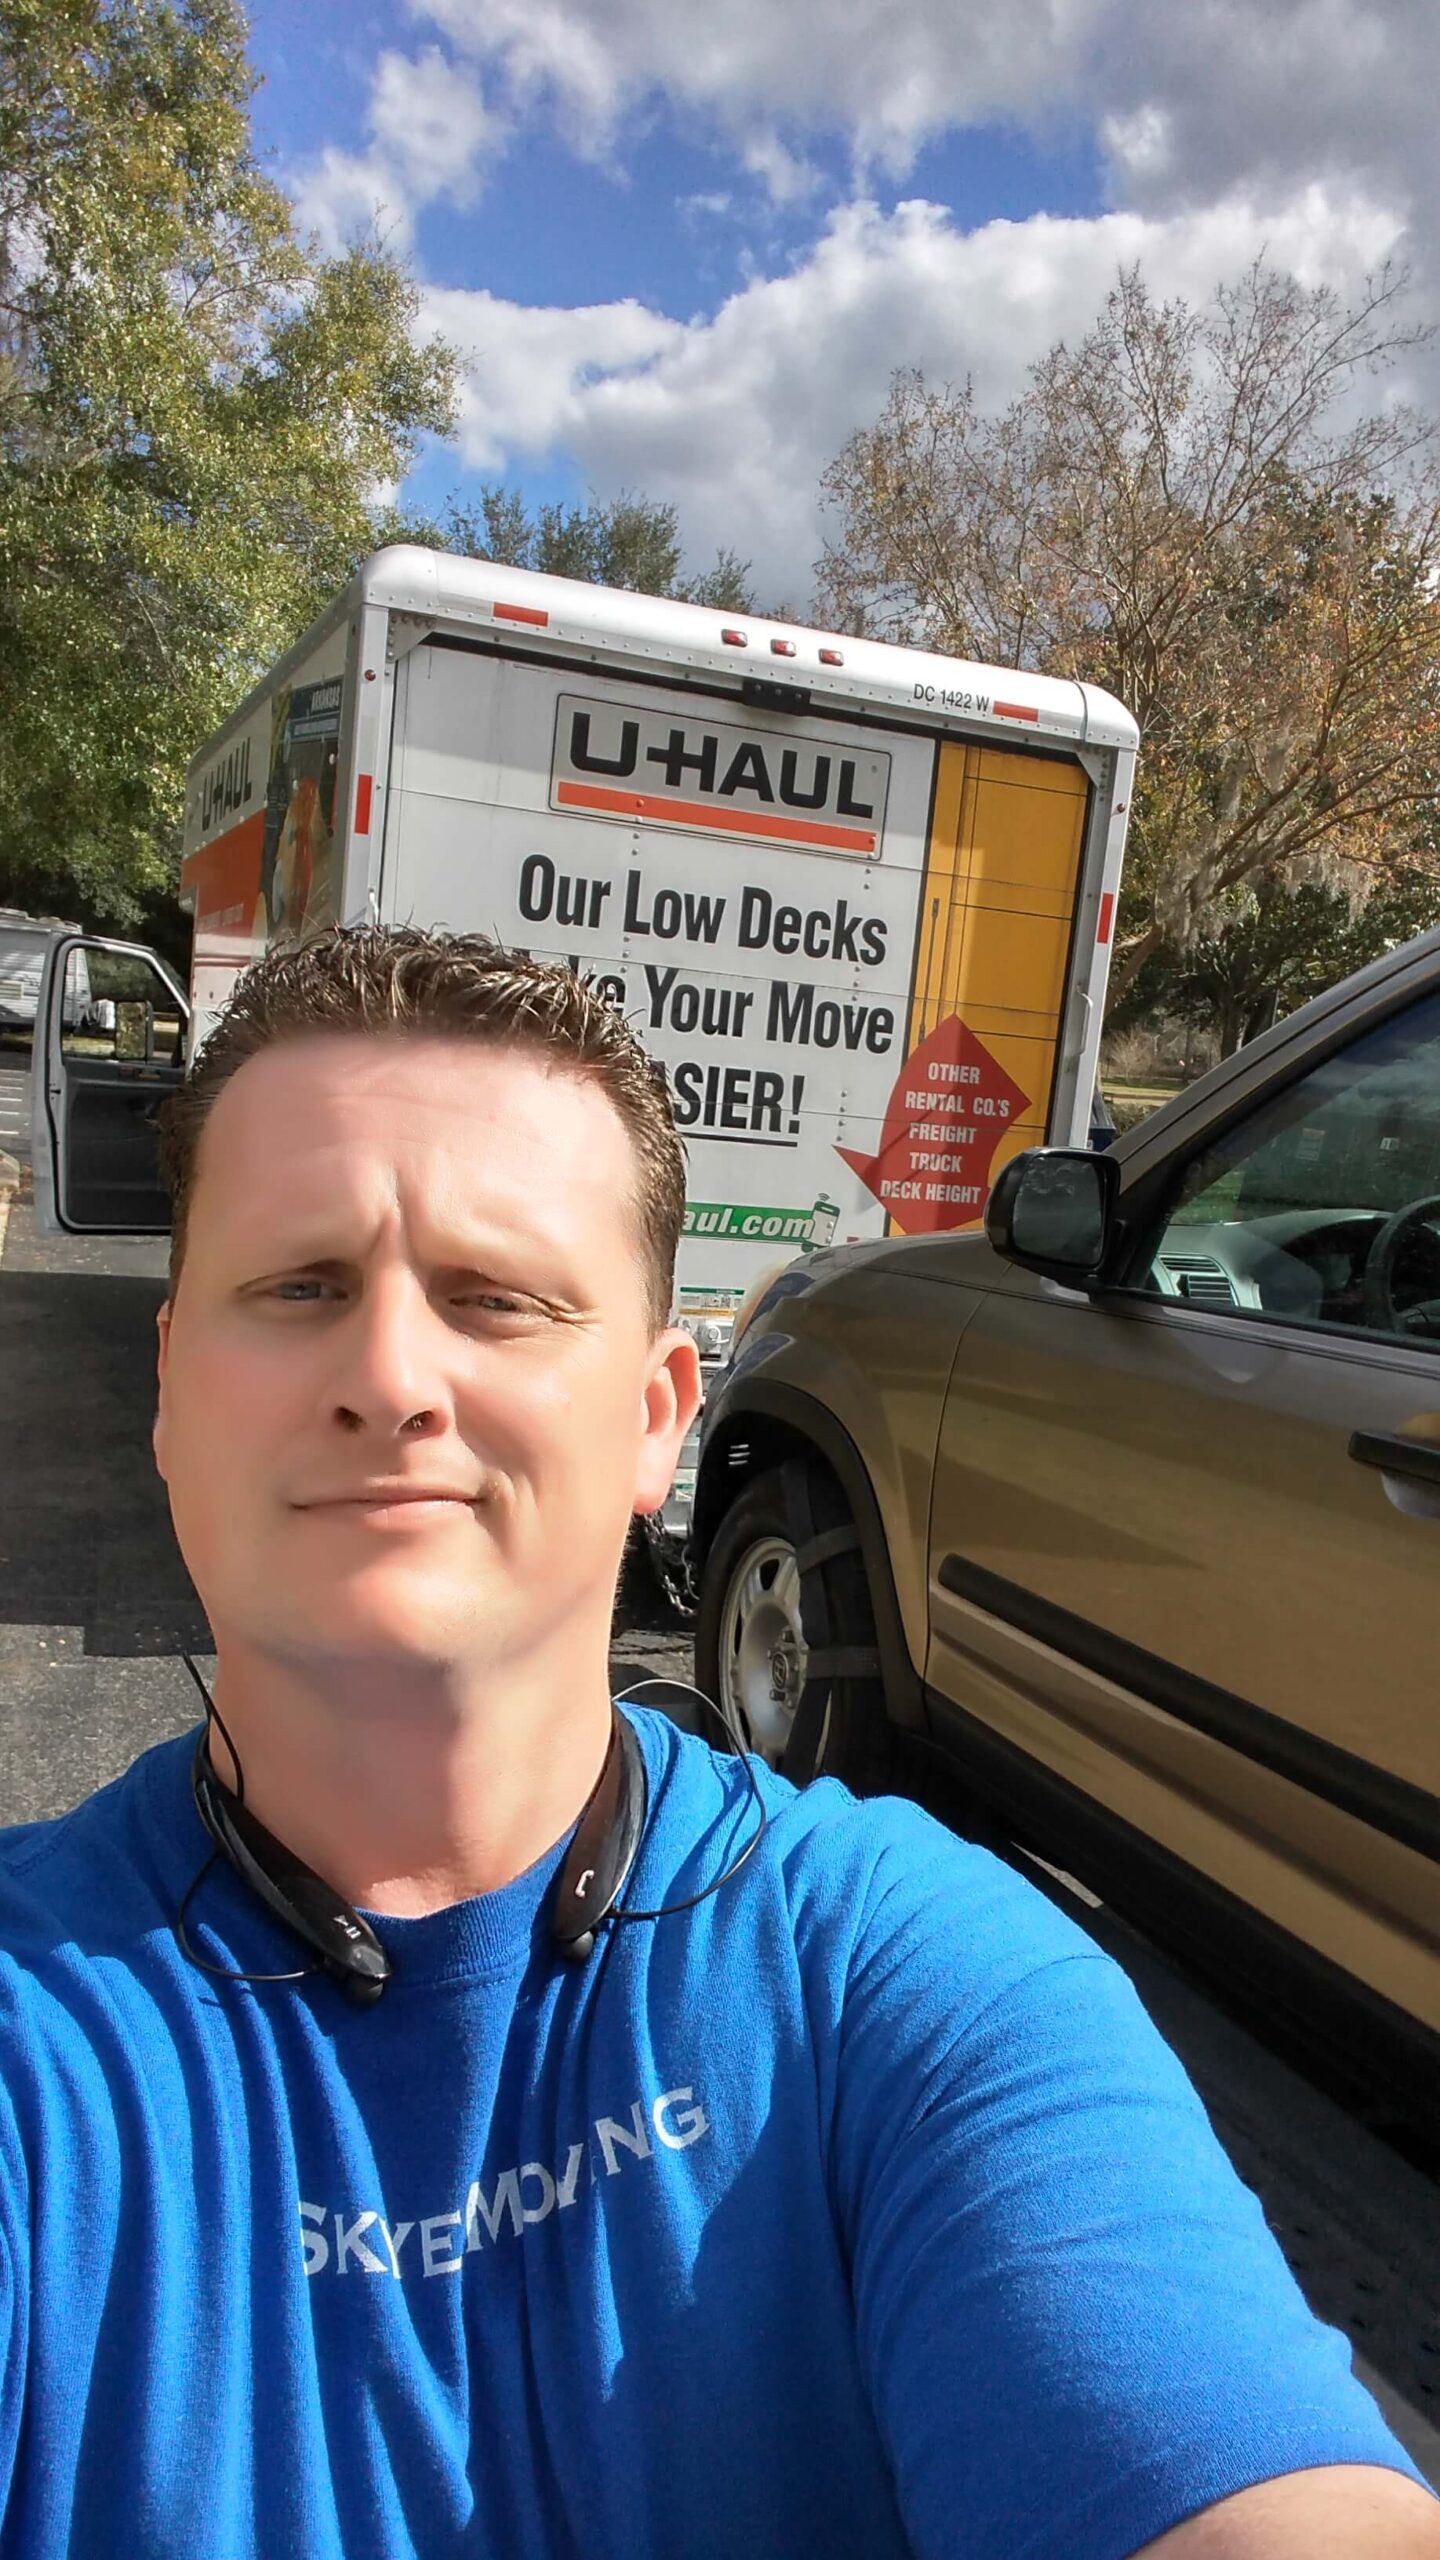 An image of Skye Moving LLC worker in front of the moving truck.